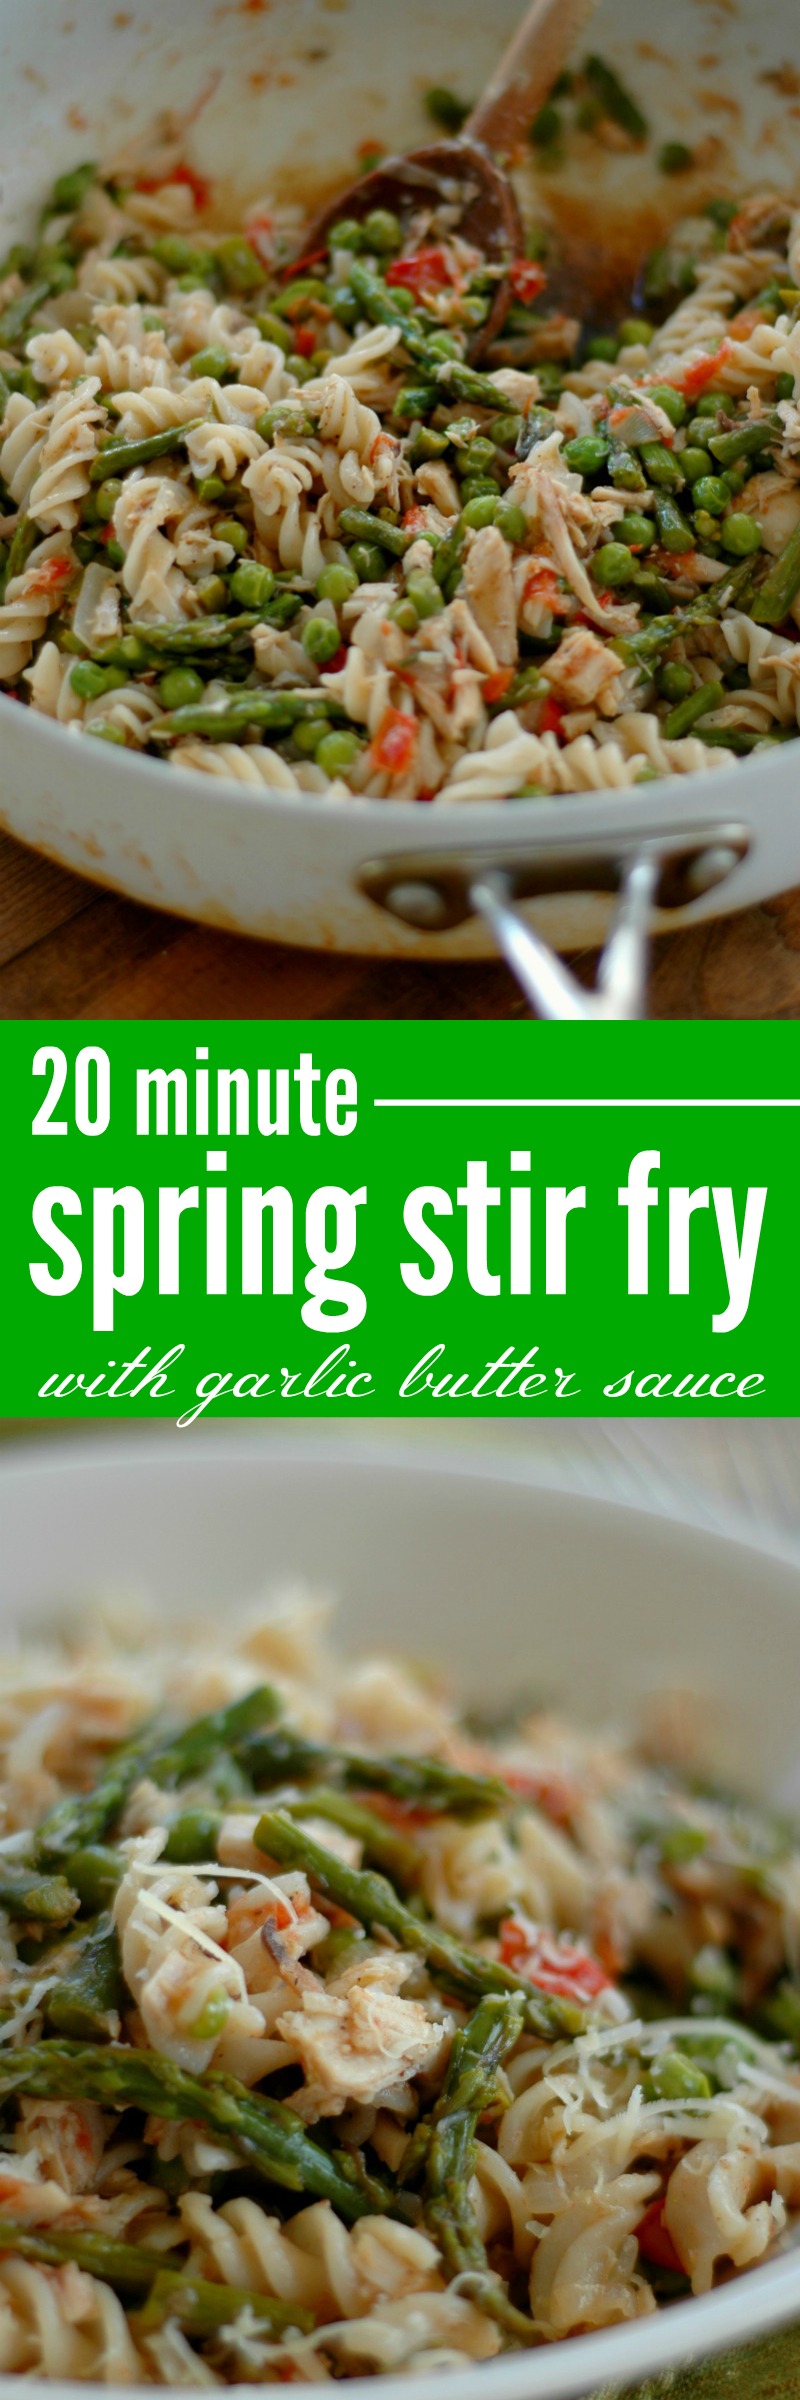 20 Minute Spring Stir Fry with Garlic Butter Sauce :: Weeknight dinner friendly, this 20 minute spring stir fry with a garlic butter sauce will satisfy on the busiest of spring evenings!